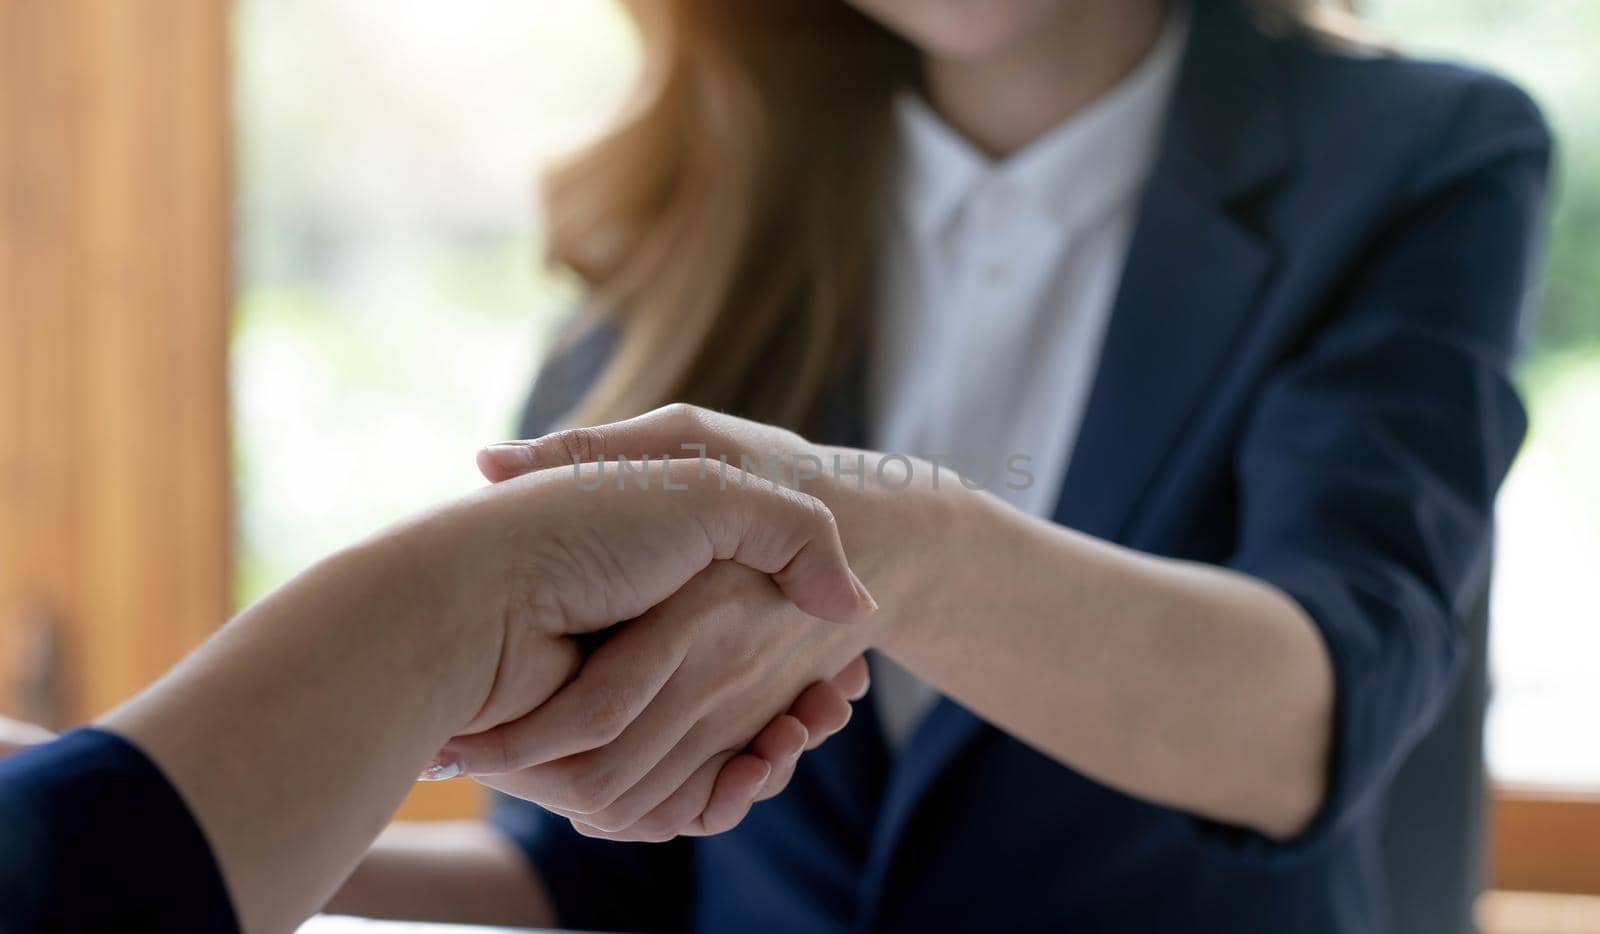 Closeup of unrecognizable happy businesswoman shaking hands with business partner after signing contract during meeting in office..